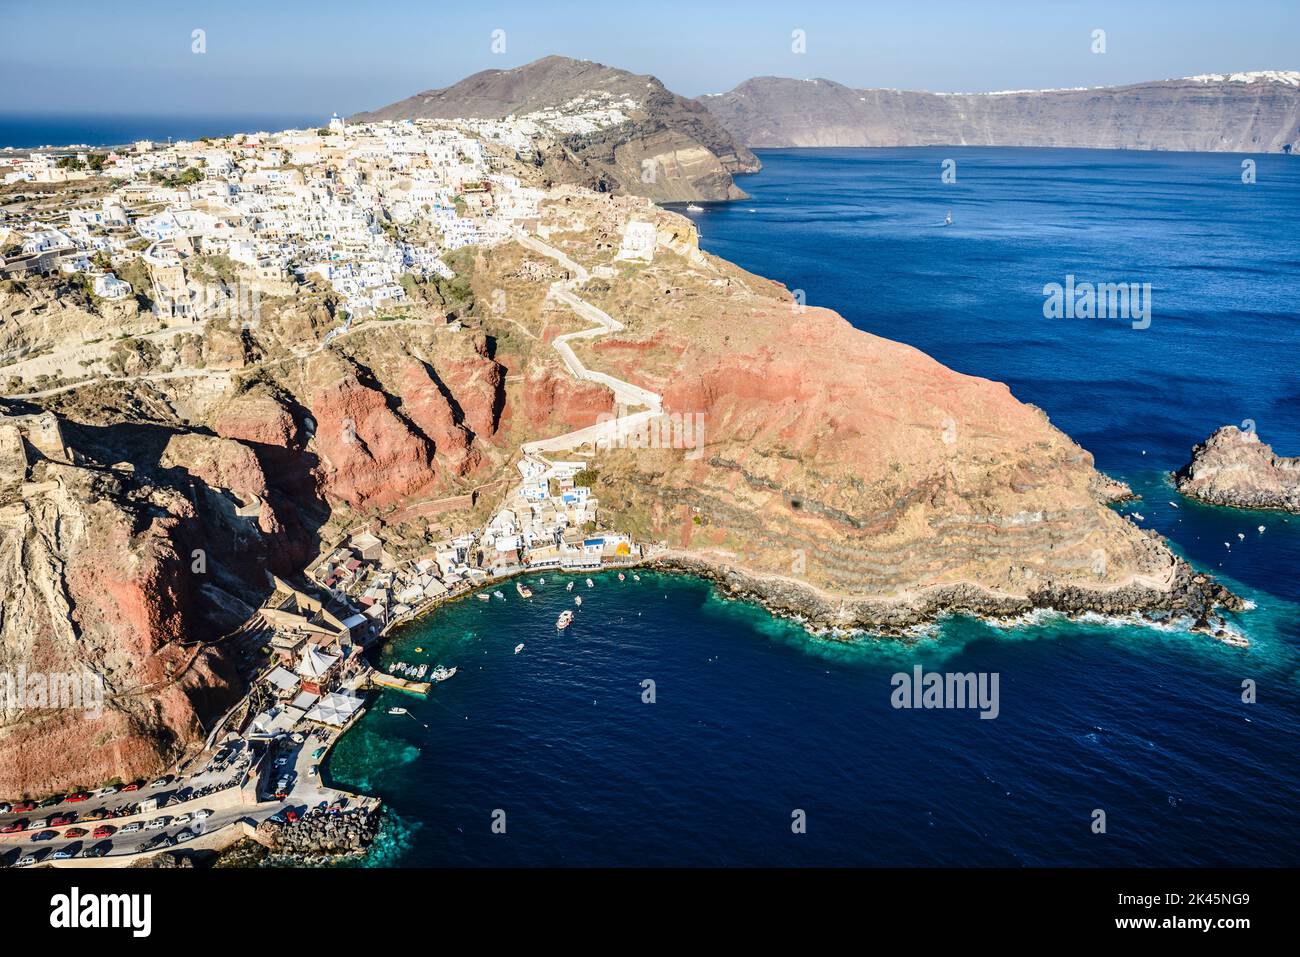 Aerial view of an island in the deep blue seas of the Aegean sea, rock formations, whitewashed houses perched on the cliffs. Stock Photo